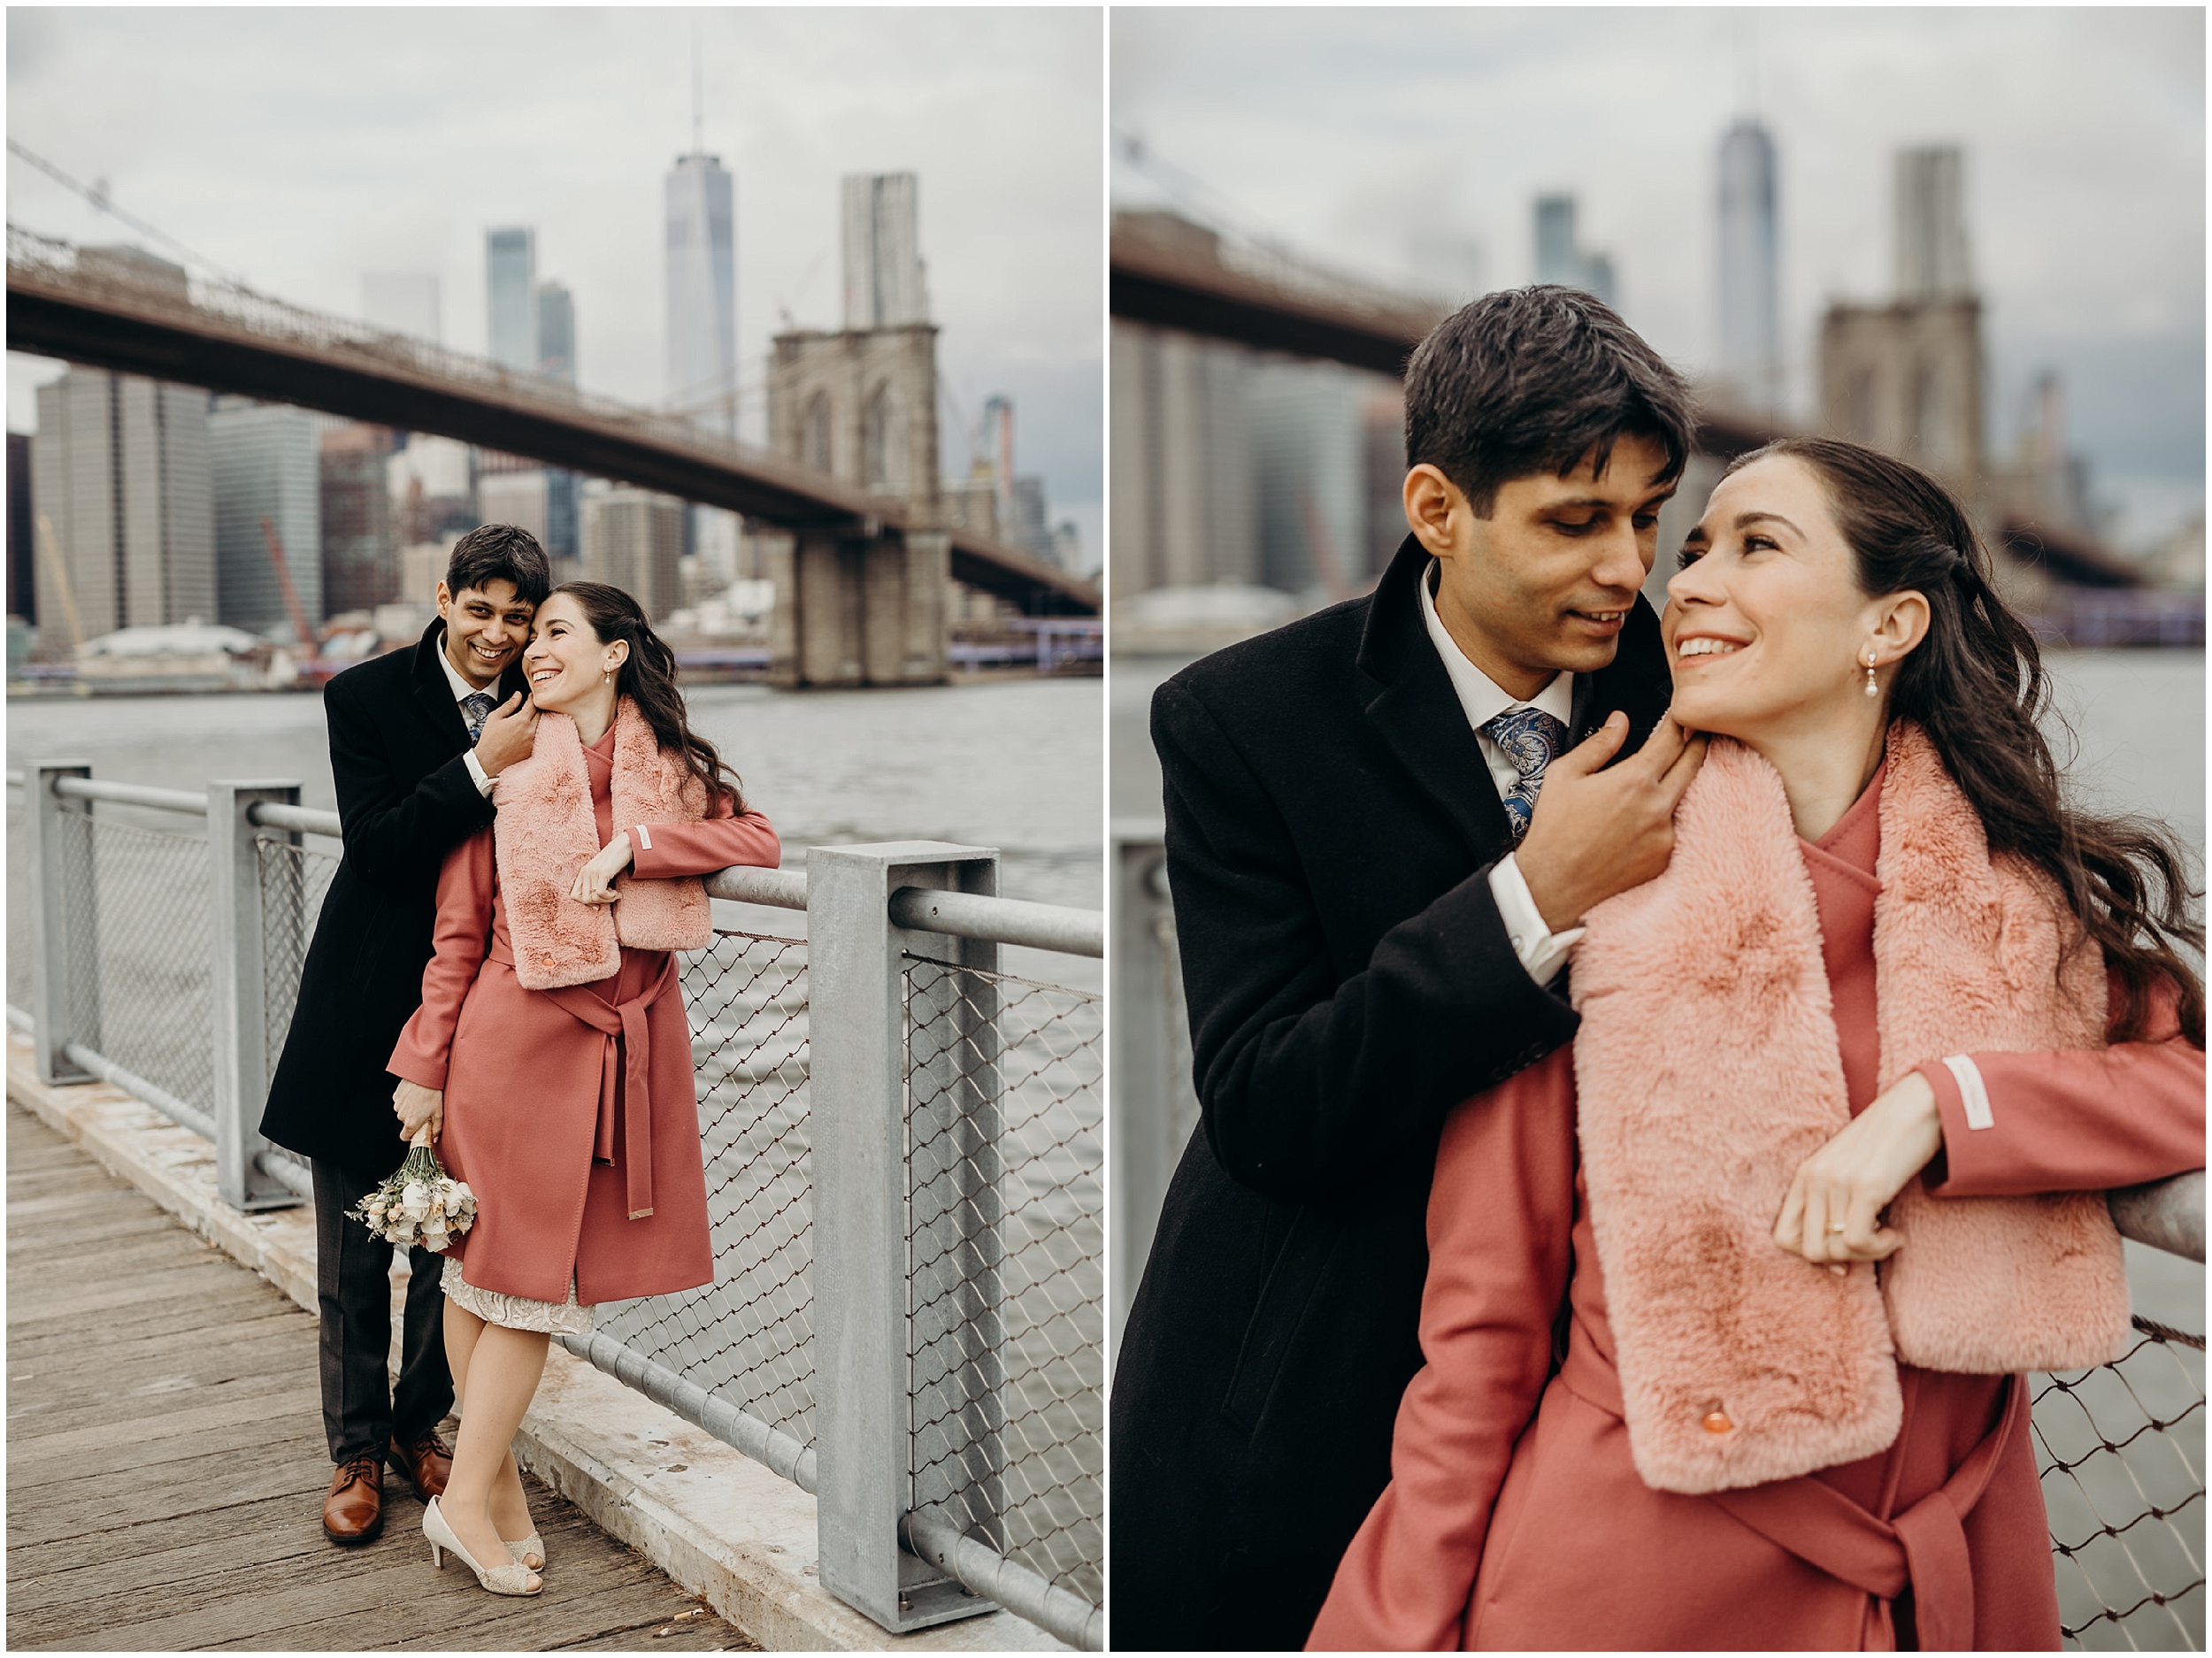 bride and groom portrait at dumbo in new york city, ny